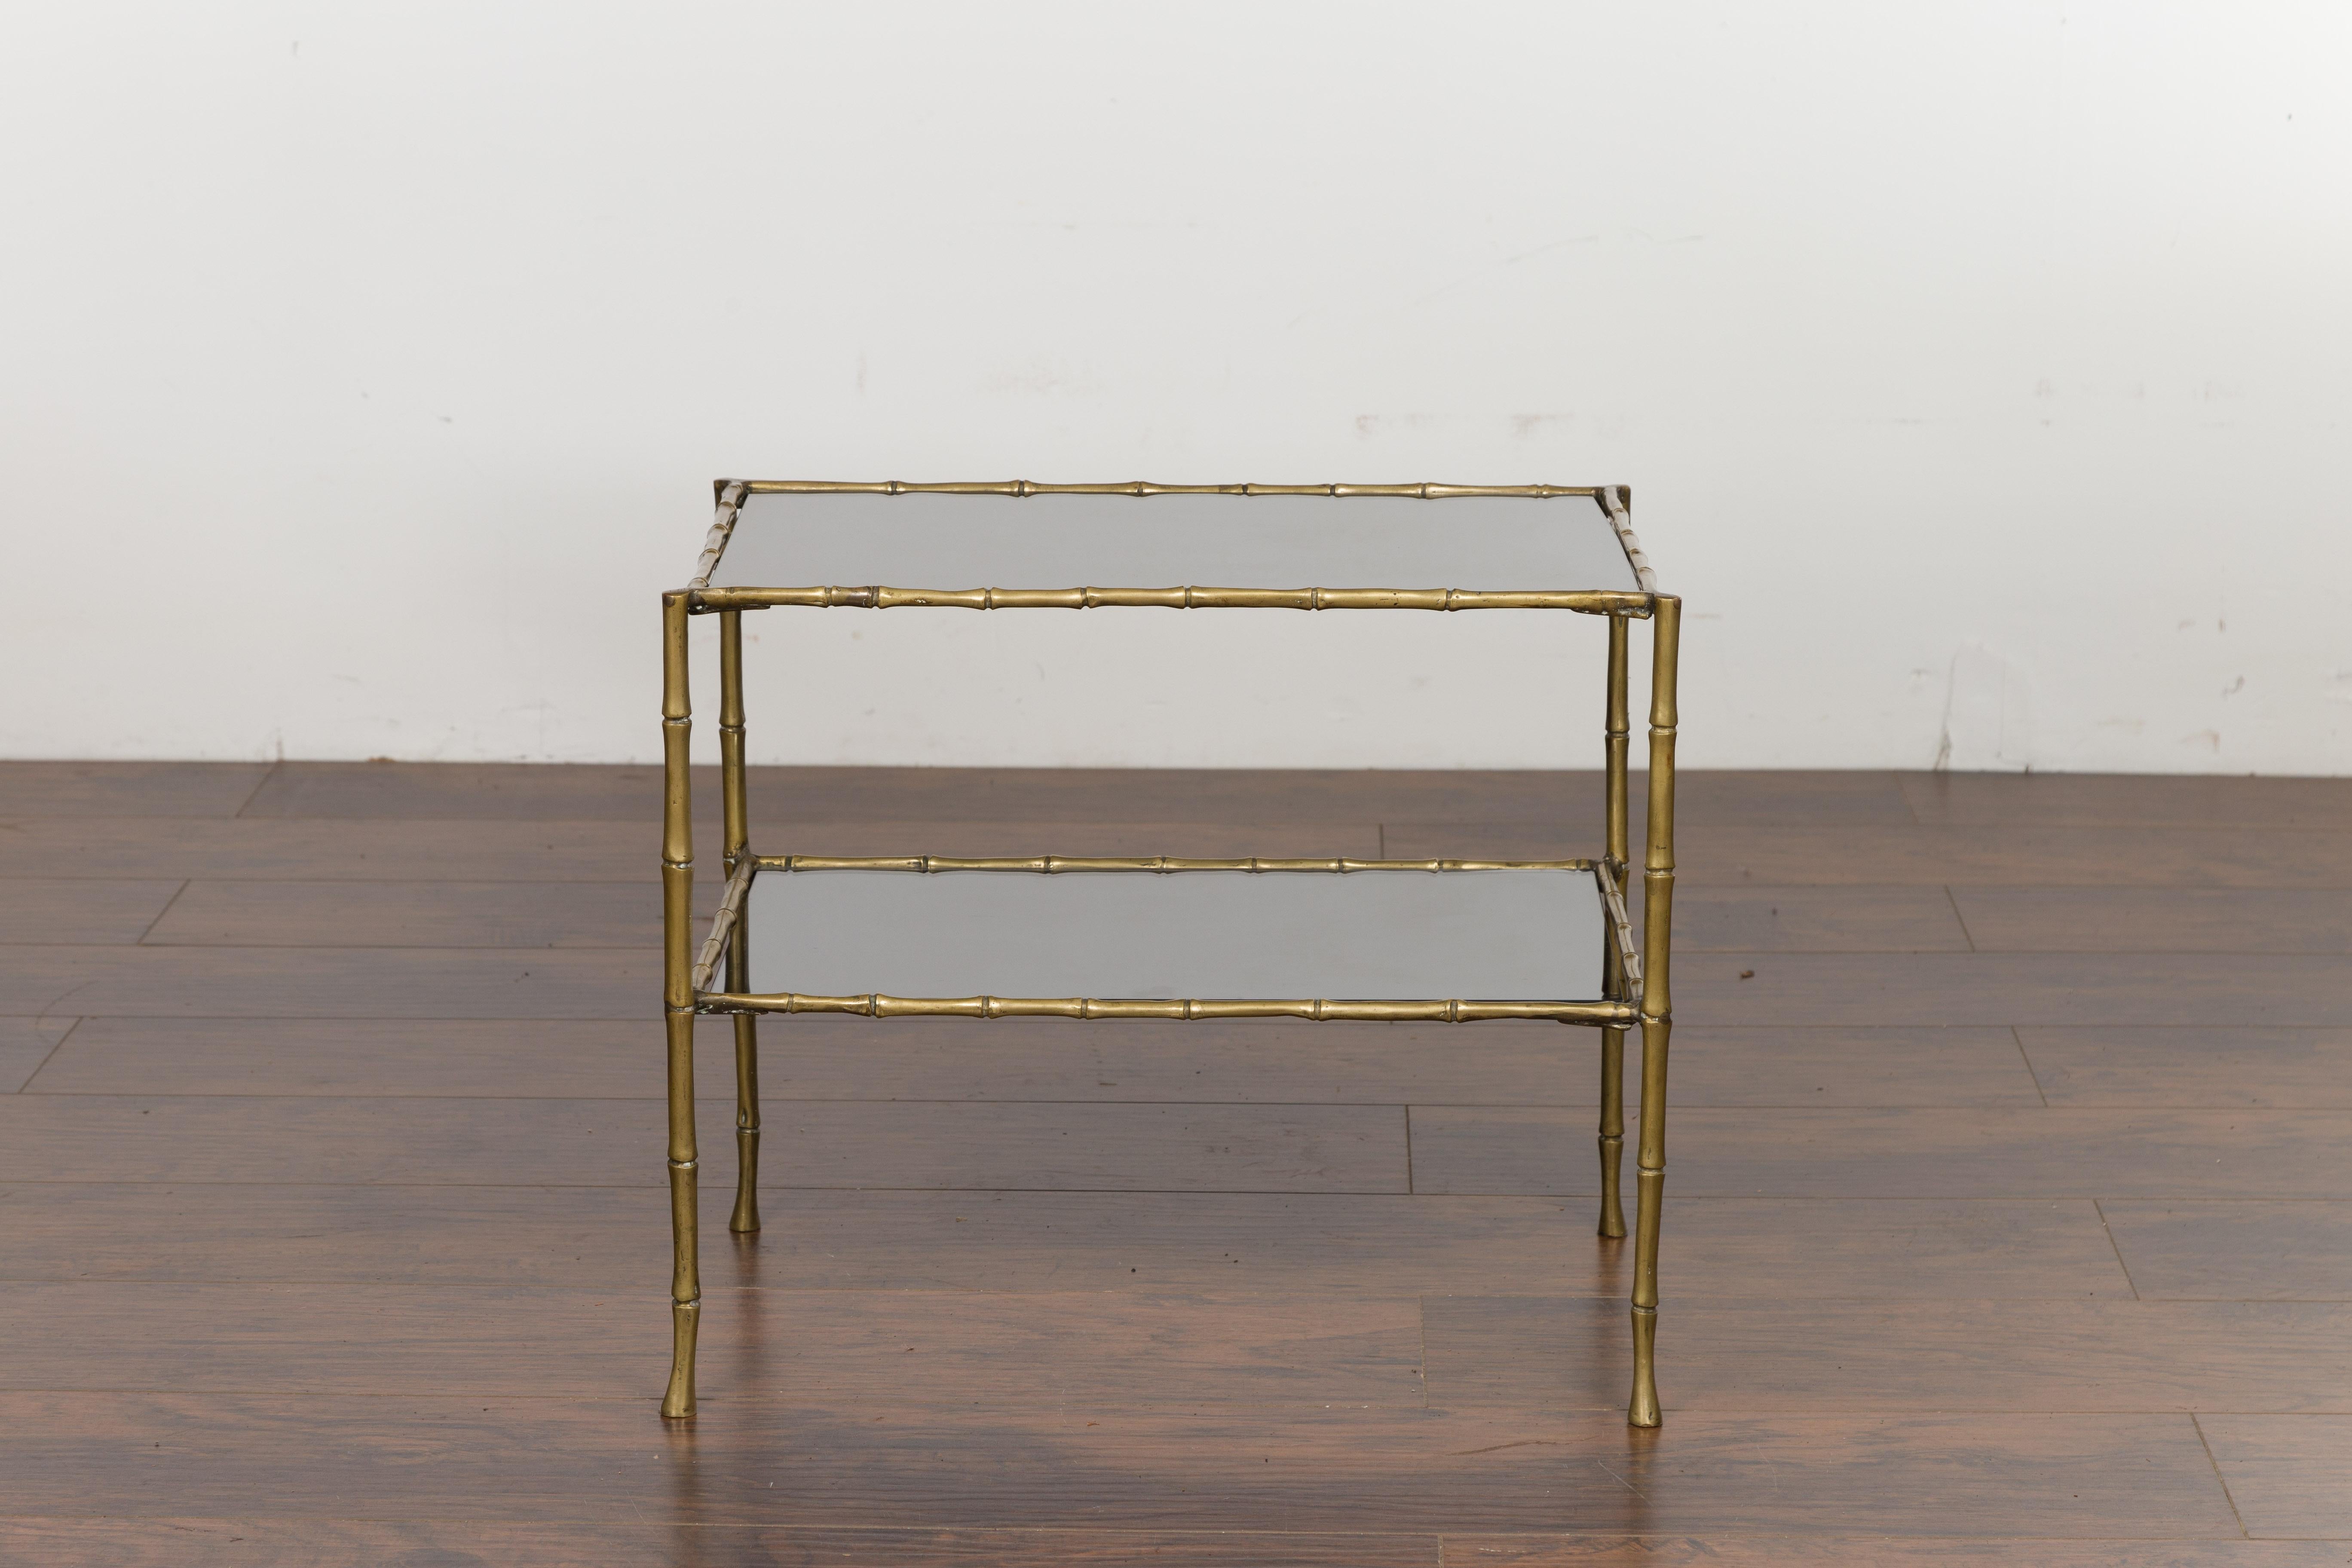 An Italian vintage brass faux bamboo drinks table from the mid 20th century, with mirrored top and shelf. Created in Italy during the midcentury period, this drinks table features a rectangular mirrored top supported by four brass faux bamboo legs